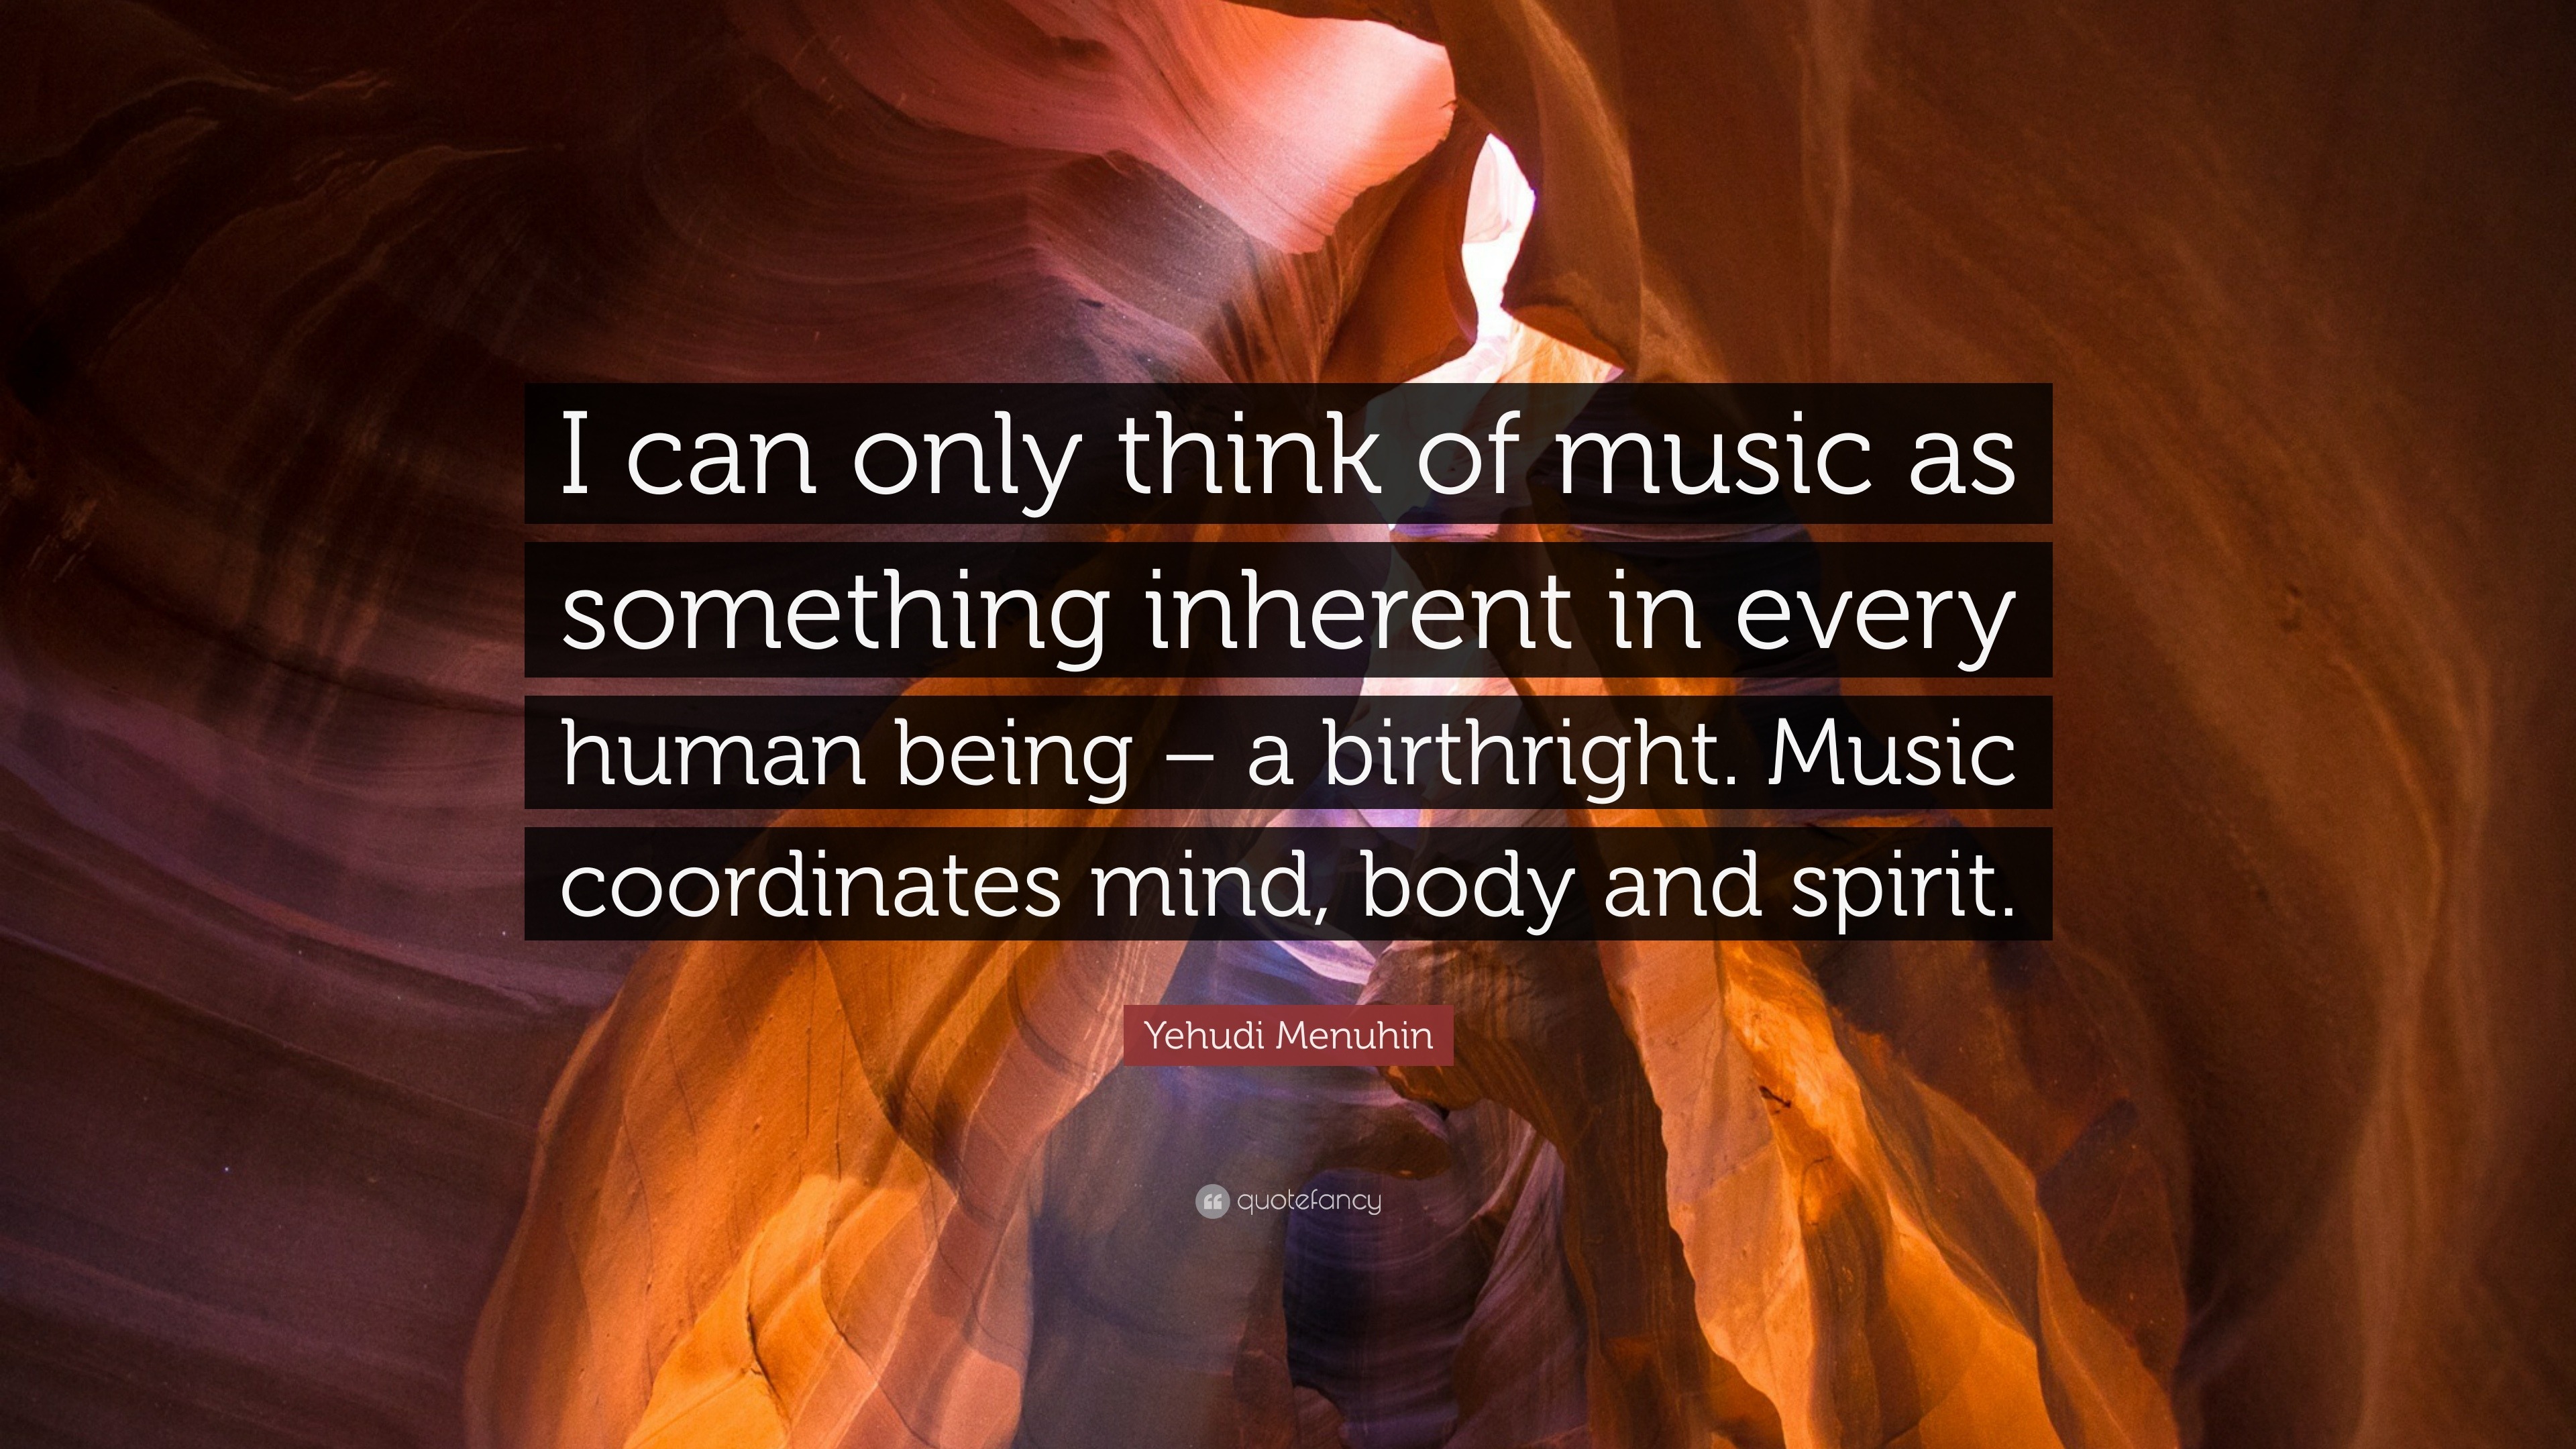 Yehudi Menuhin Quote: “I can only think of music as something inherent ...